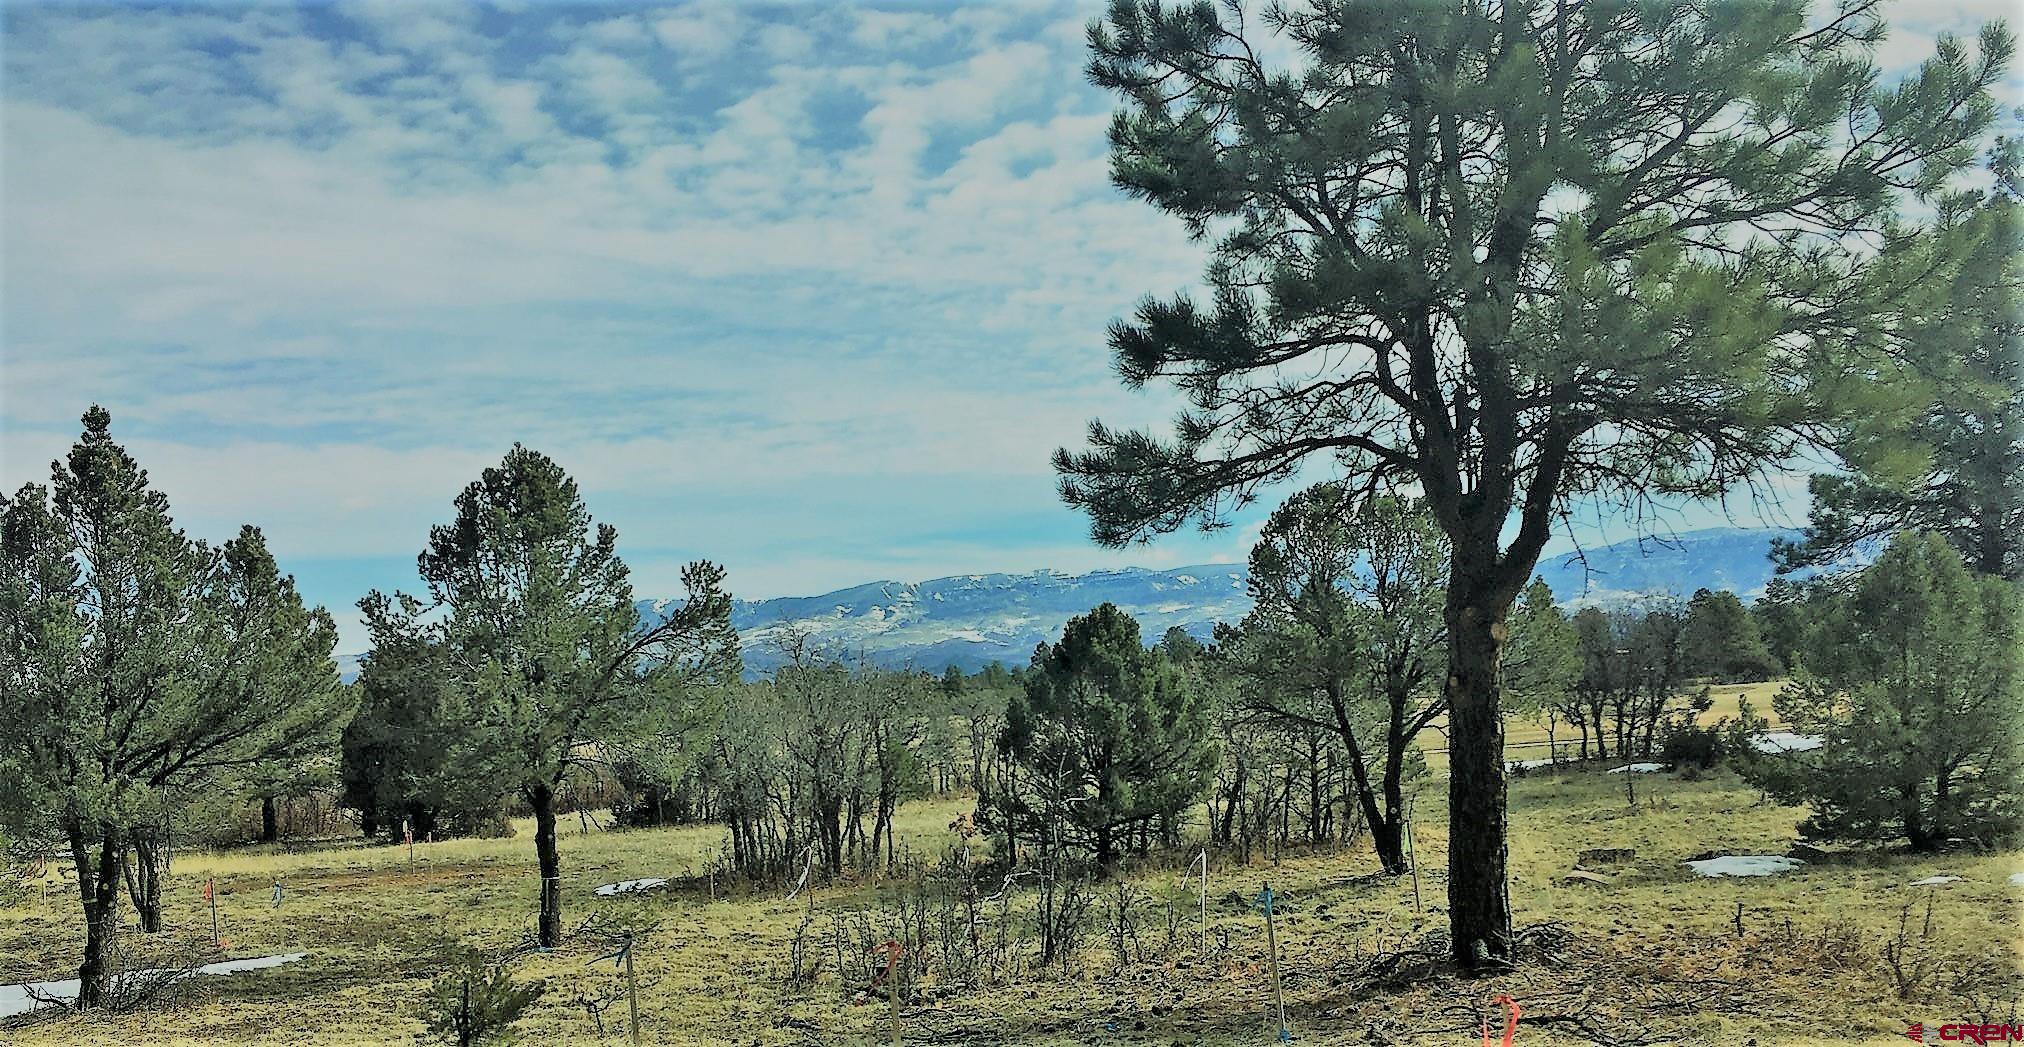 Beautiful level cluster lot at the tee on the first hole of the scenic Divide Ranch and Club.  Soaring ponderosa pines, gorgeous mountain views and golf course views. Large lot of 1.2 acres zoned multi-family allowing a build of 3 detached homes or a triplex.   Ownership includes The Divide Ranch and Golf Club with its 7038 YD, 18 hole award winning golf course. The fabulous clubhouse is a short walk, so enjoy Friday Night Burger Night (see clubhouse schedule) and walk home. Located on Log Hill, just 6 miles from the historic town of Ridgway and 30 minutes from Montrose Regional Airport; 45 minutes from Telluride's world class skiing and 10 miles from Ouray's famous hot springs and the San Juan Skyway.